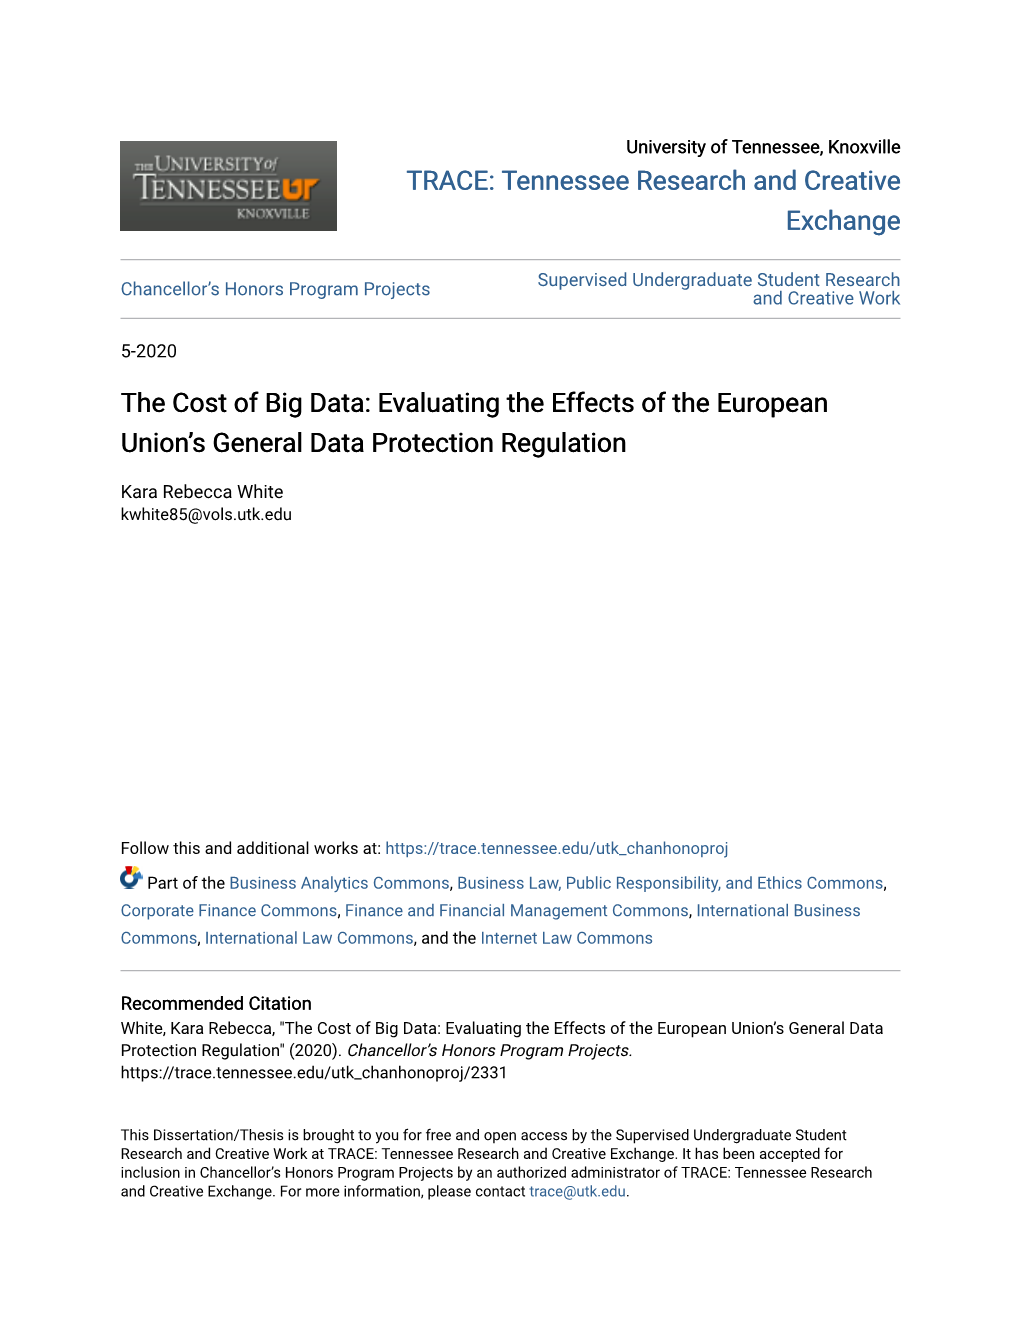 Evaluating the Effects of the European Union's General Data Protection